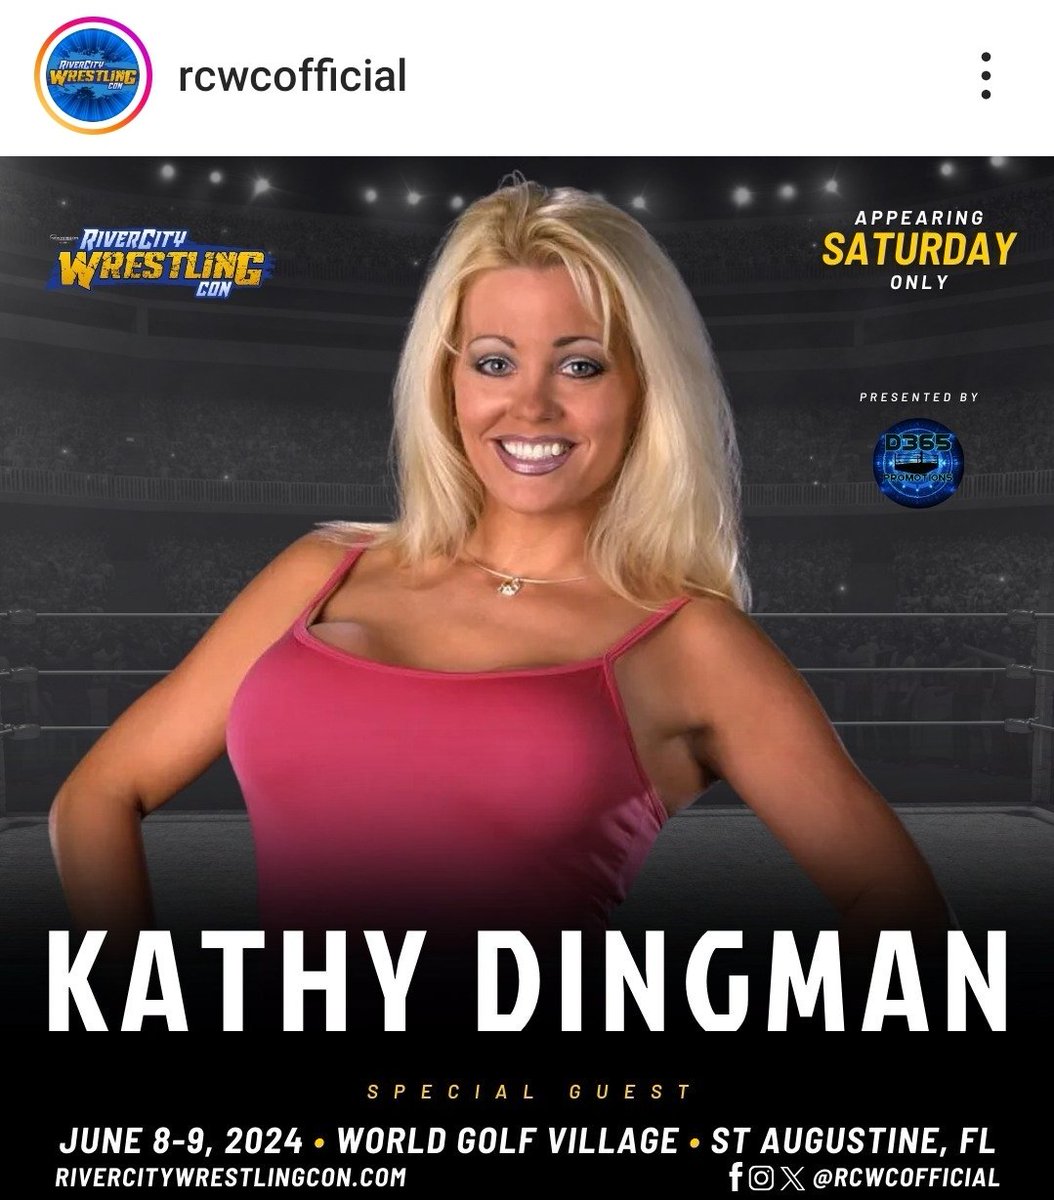 As reported on @rcwcofficial Our 1st guest for Saturday only, is former WWF, WCW, TNA Star @kathydingman fka BB, Barbra Bush, Taylor Vaughn, etc. Come see BB Saturday, June 8th!!